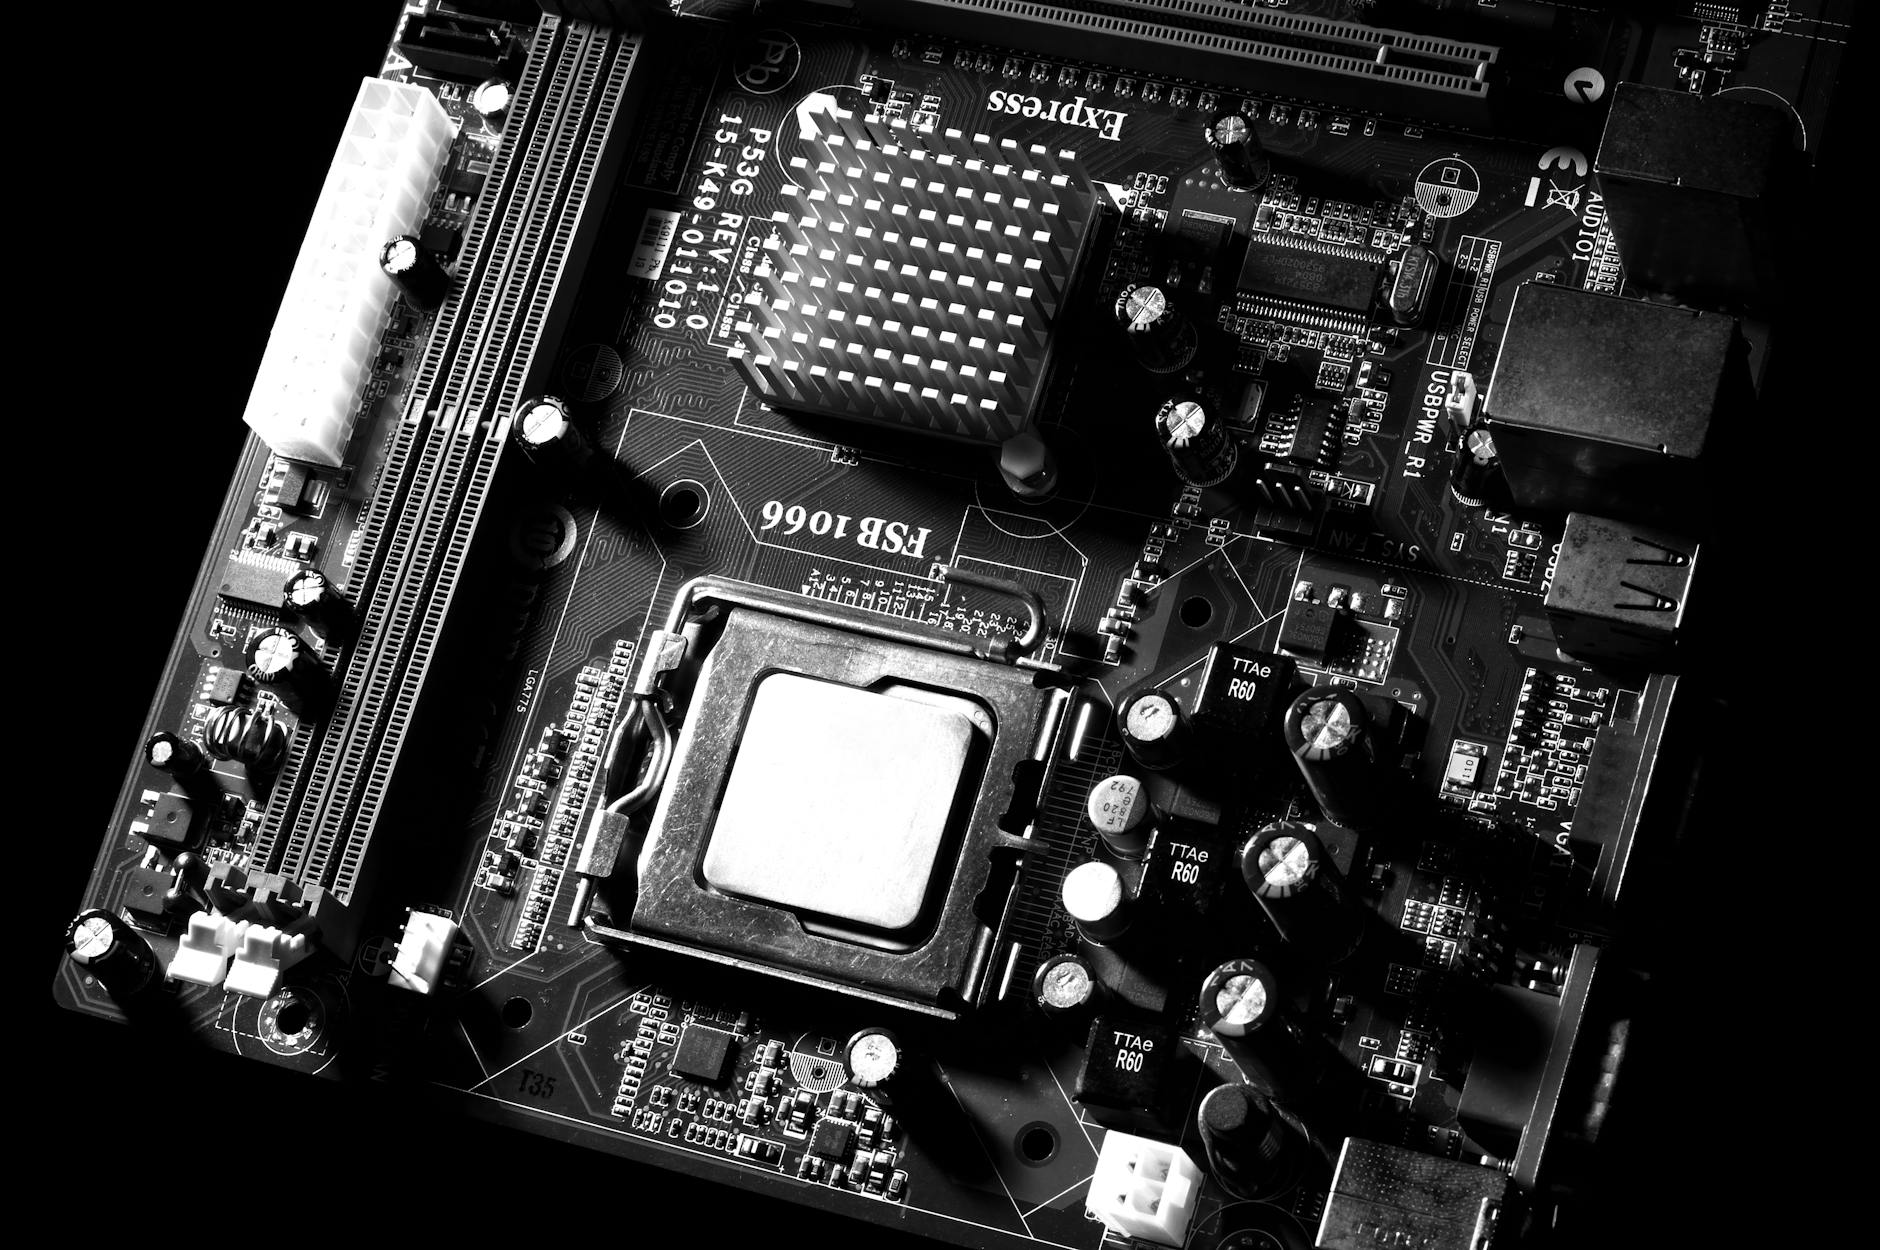 An image of a black coloured Motherboard with a CPU attached.